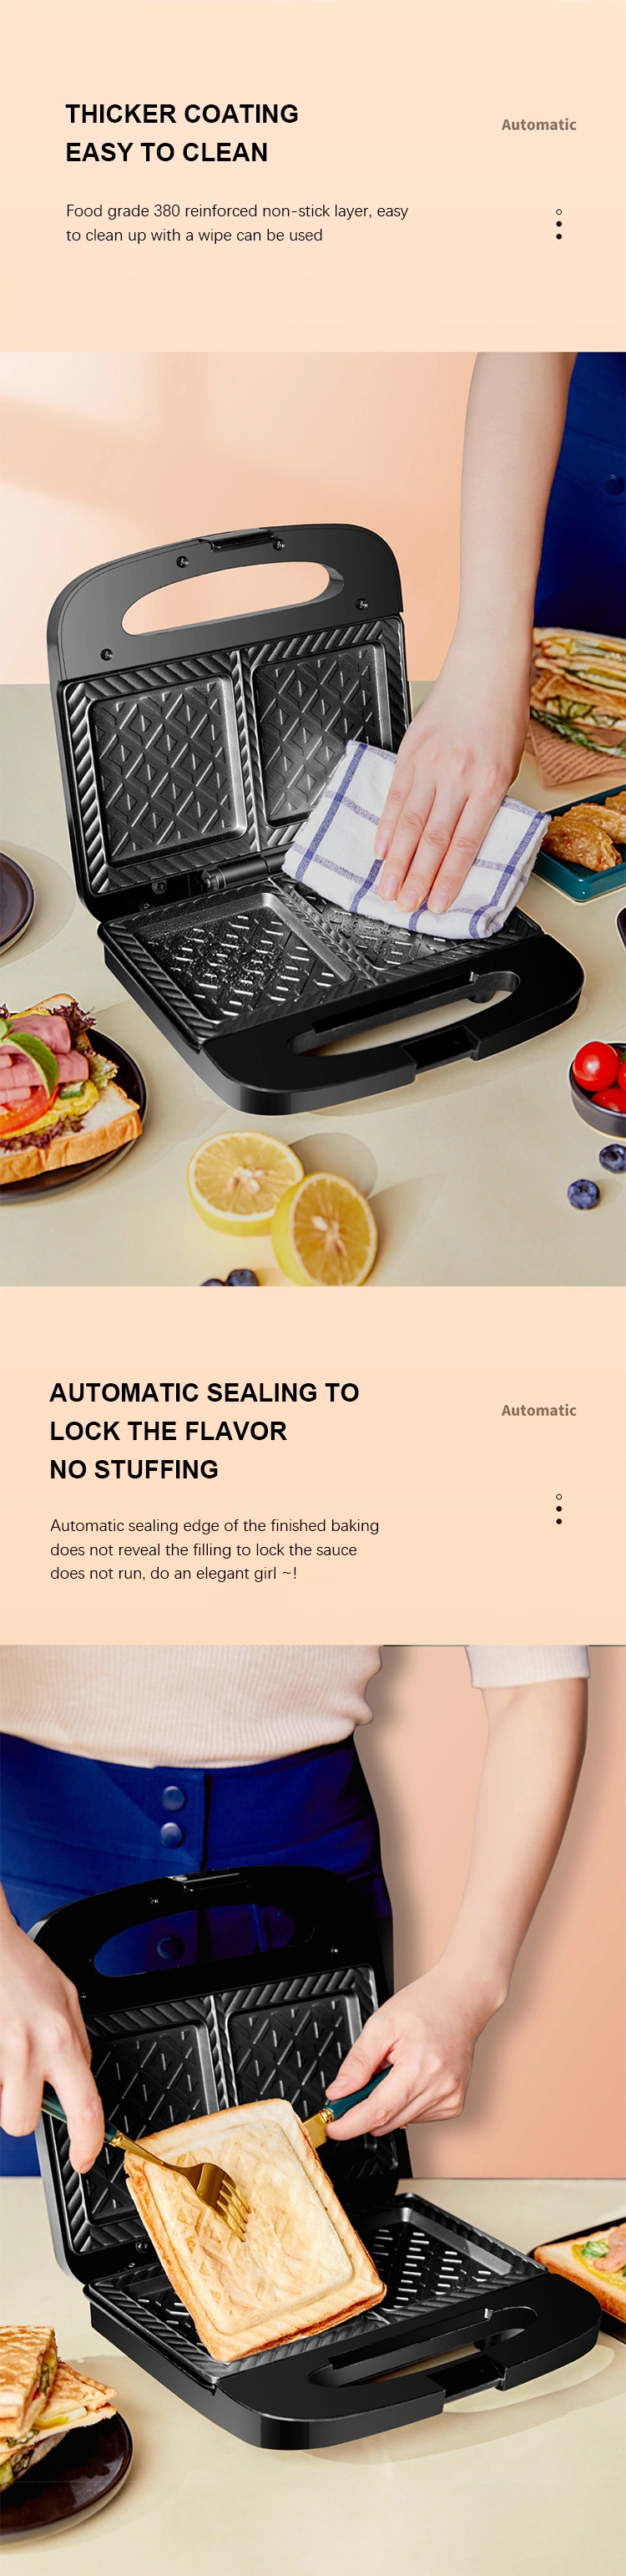 New Arrived 2 3 4 7 in 1 Breakfast Waffle Maker and Sandwich Maker with 7 Sets of Detachable Nonstick Plates